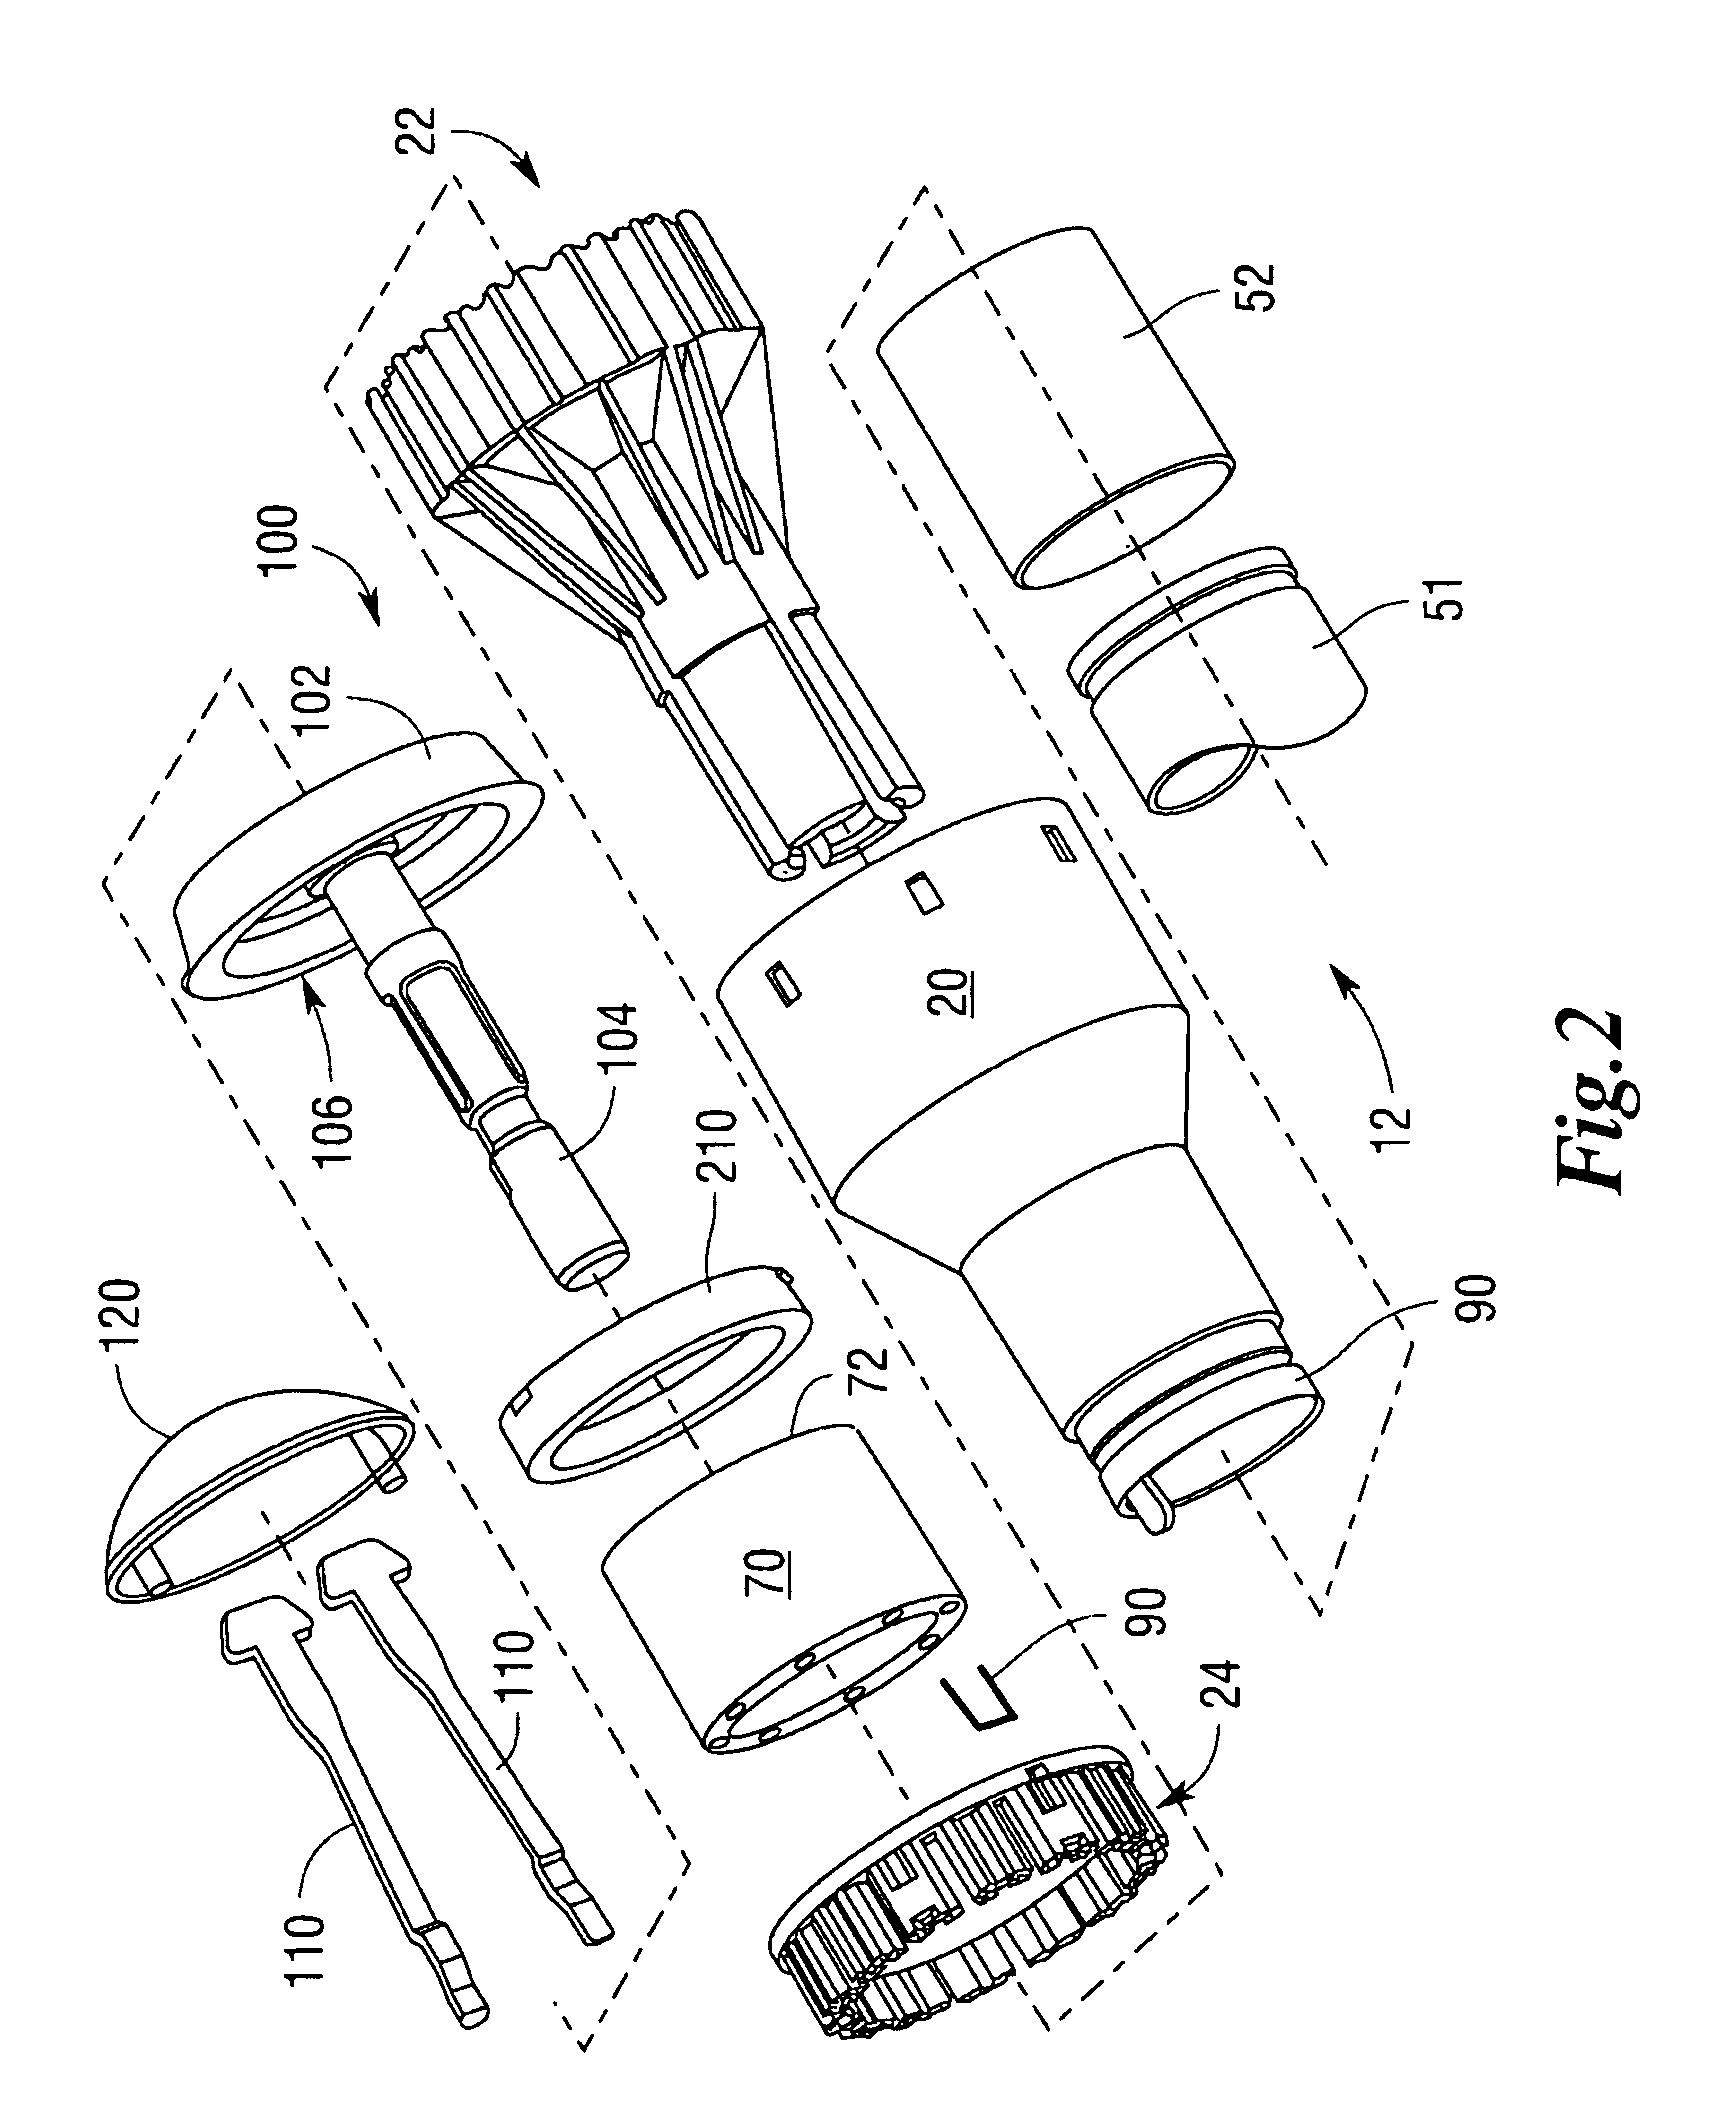 Circular surgical stapling instrument with anvil locking system